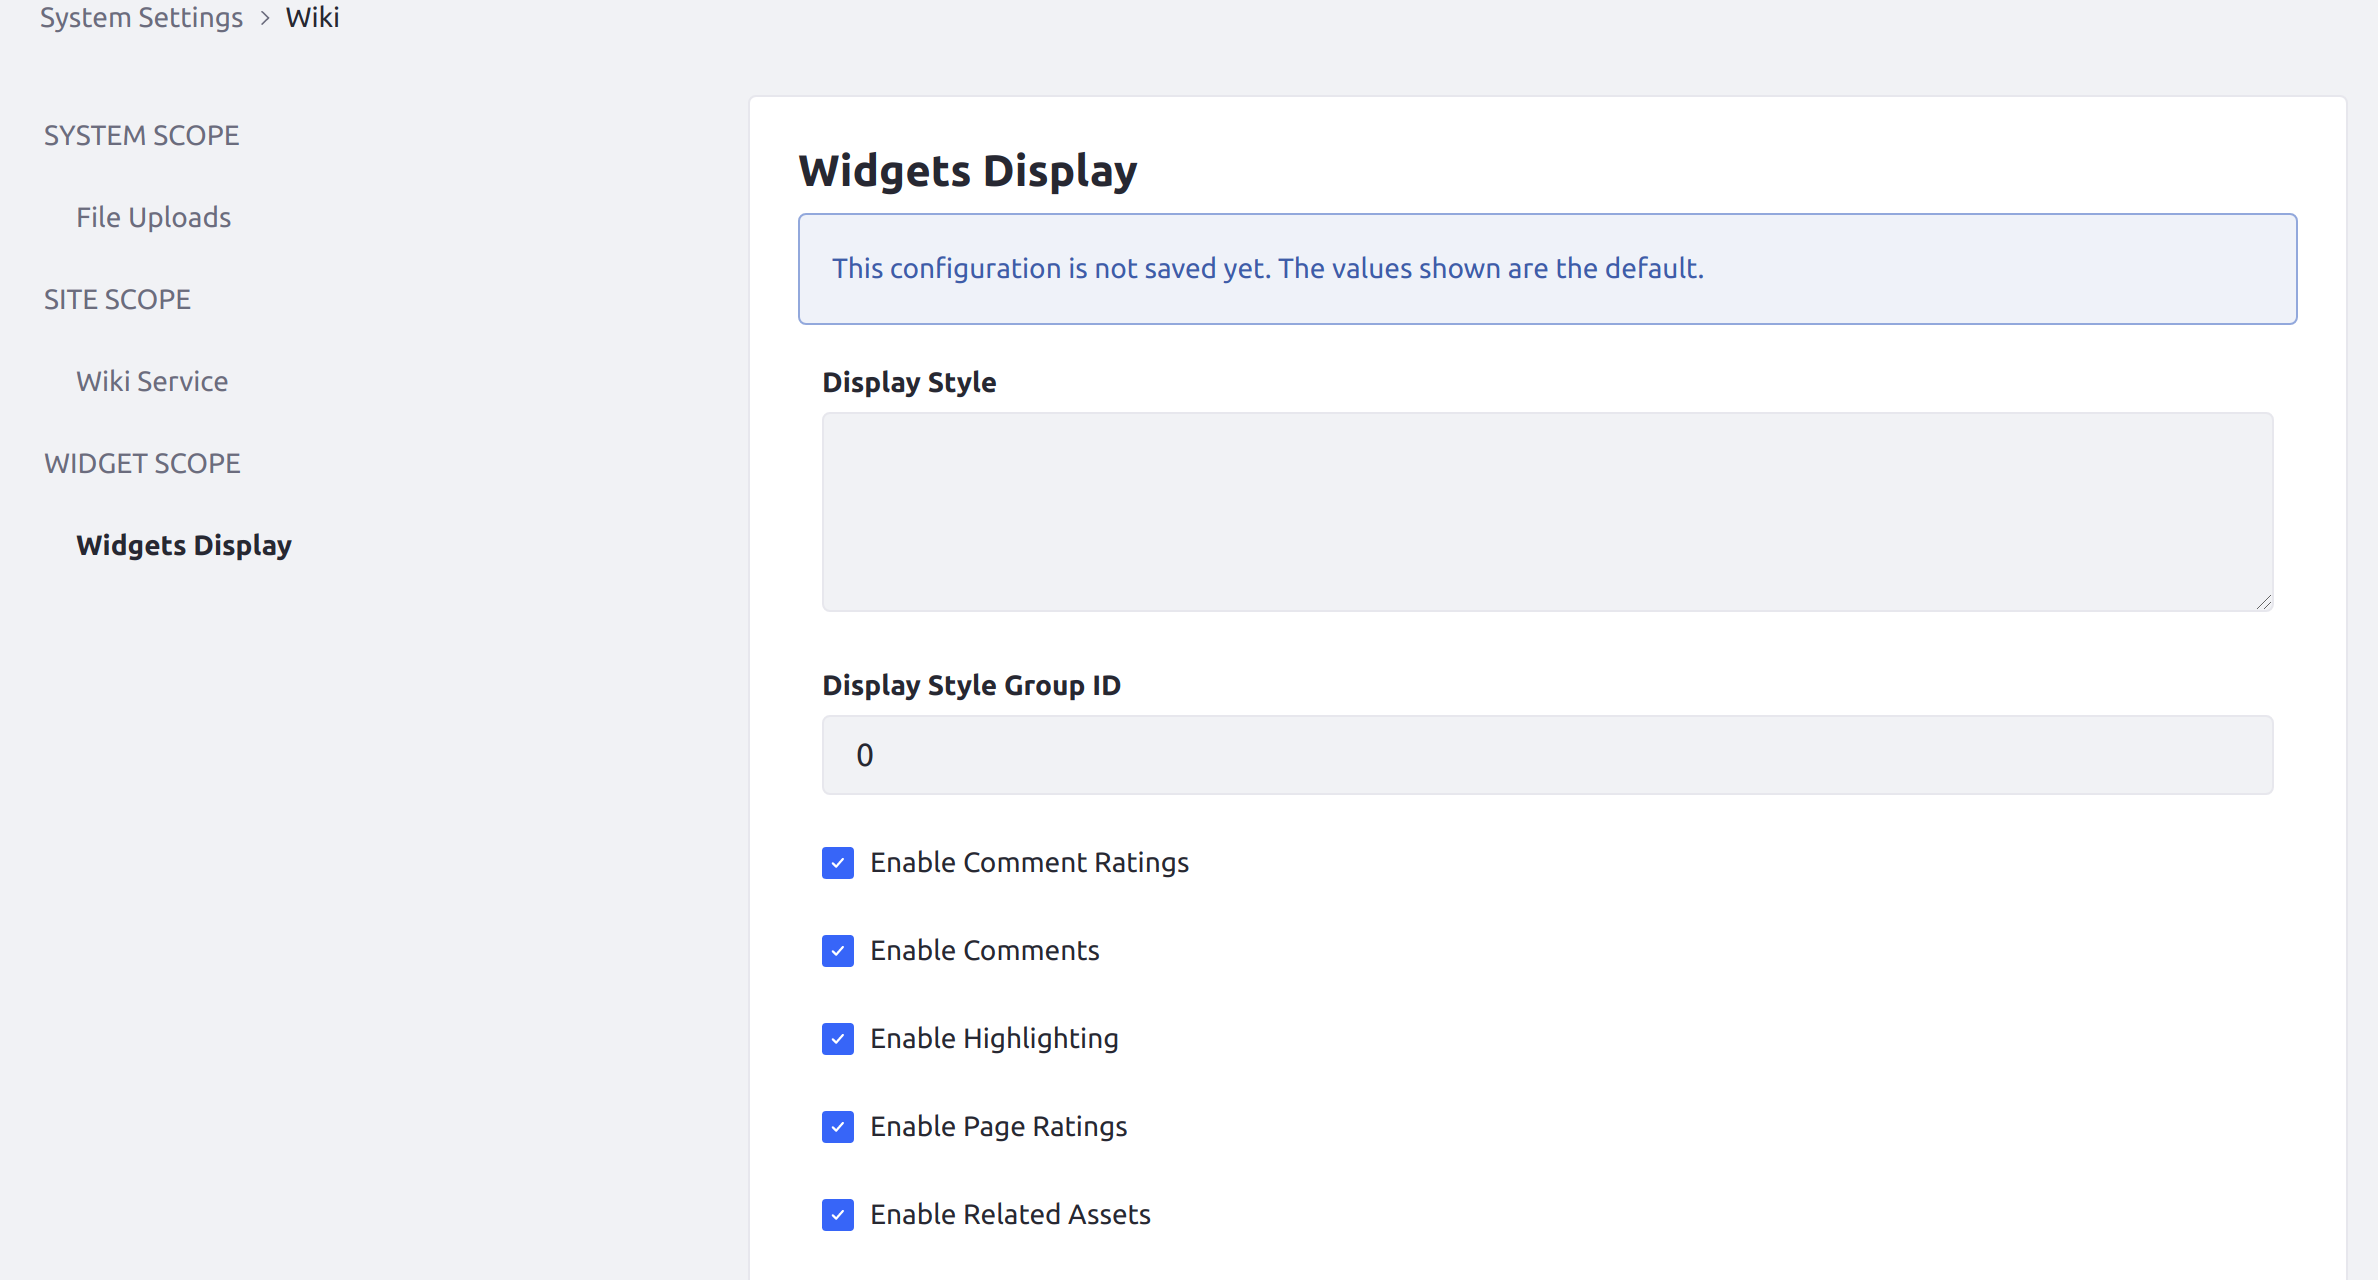 Administrators can also enable or disable ratings for a widget across multiple Sites.